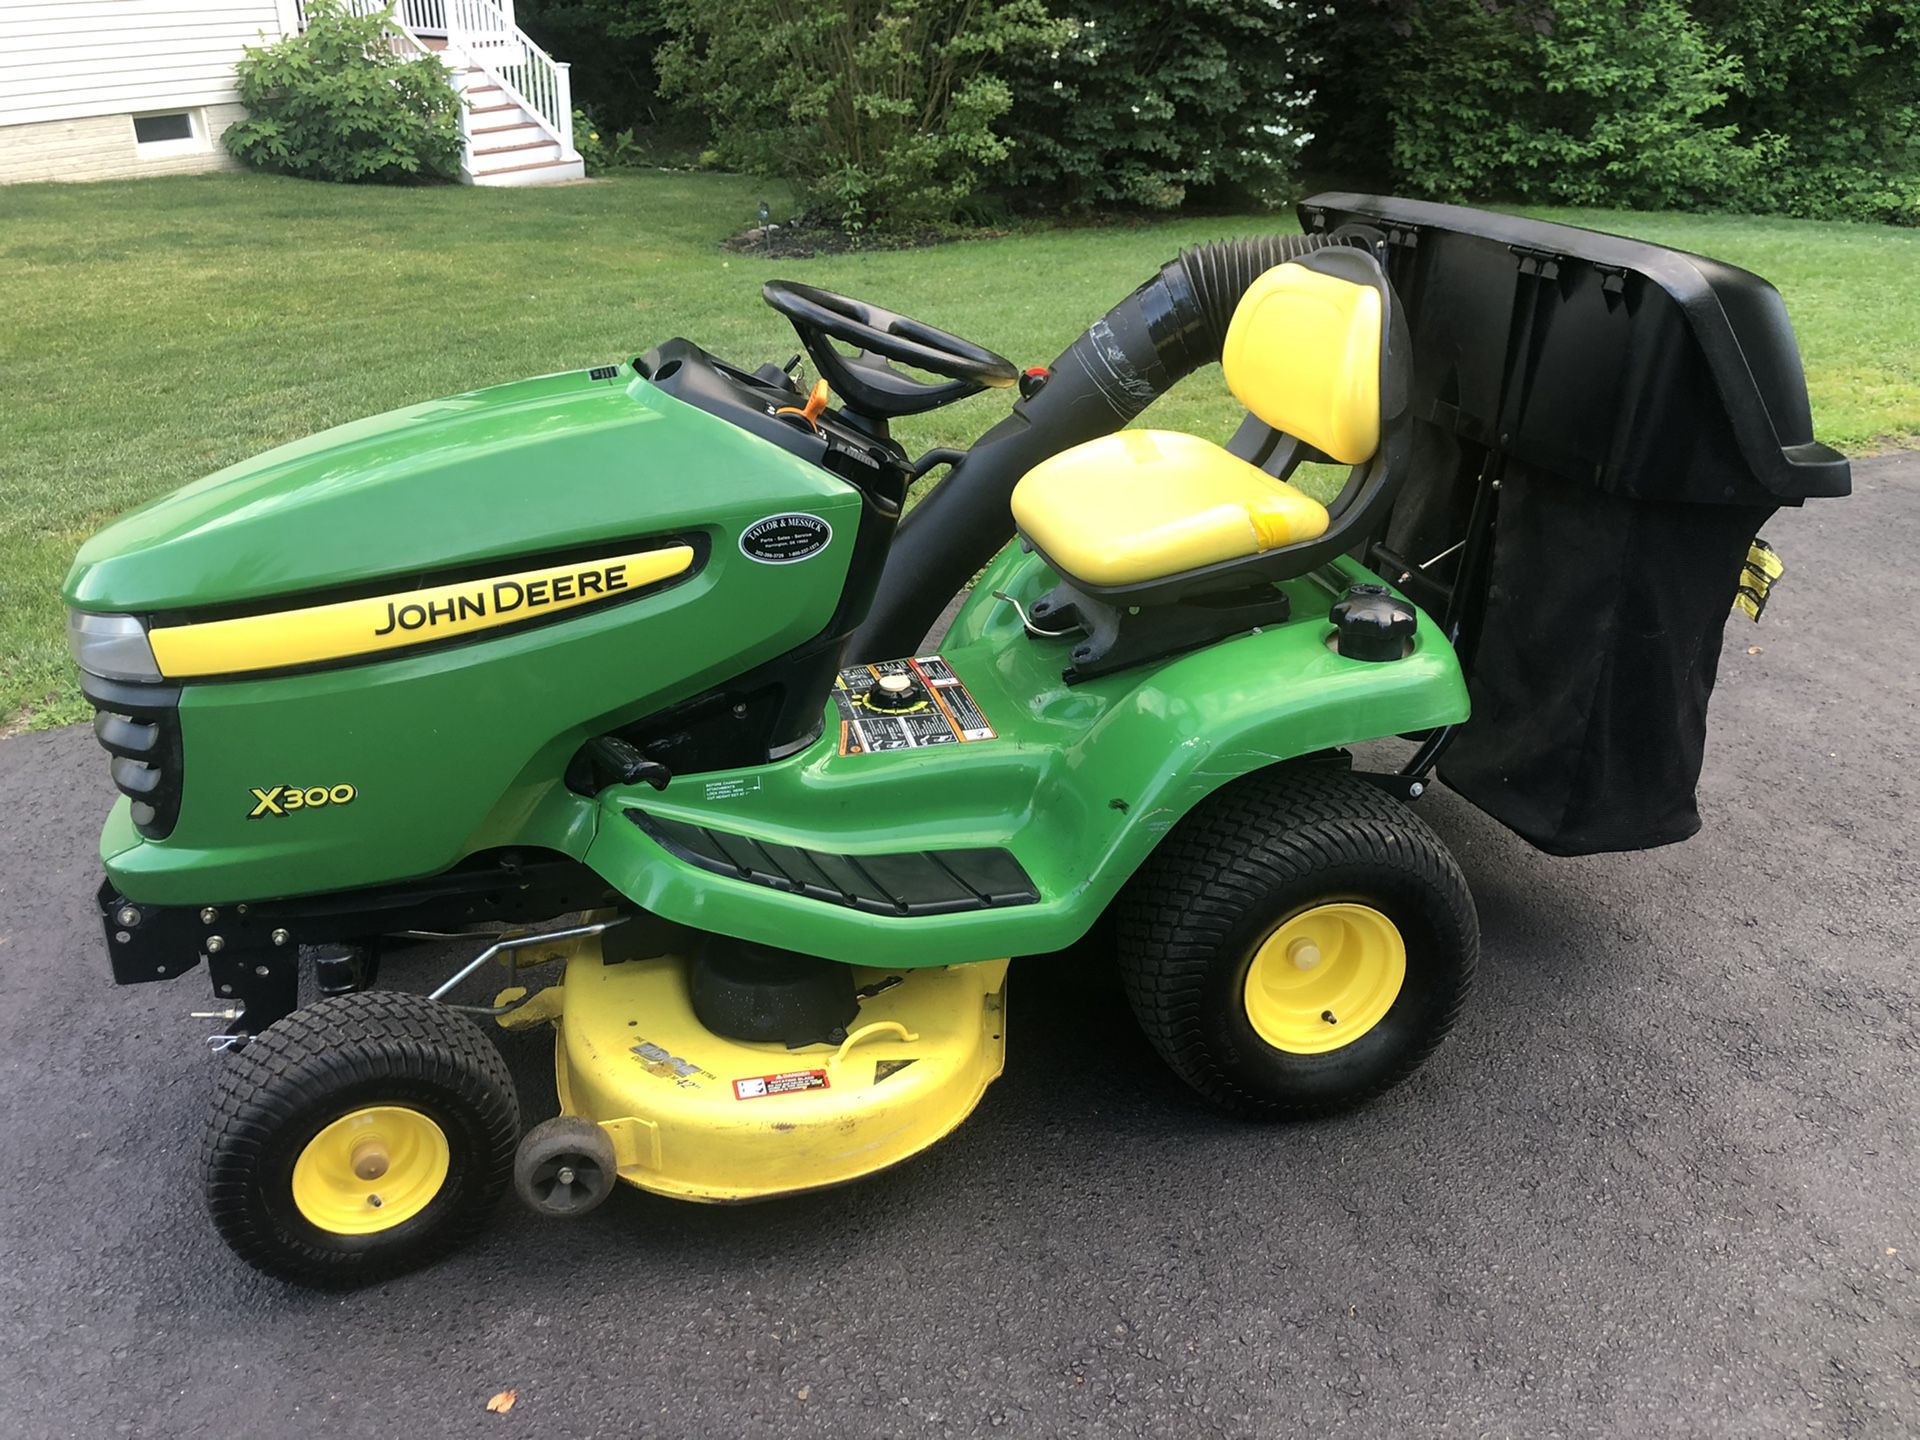 John Deere X300 42" Riding Mower with 2 Bin Bagger and Delivery